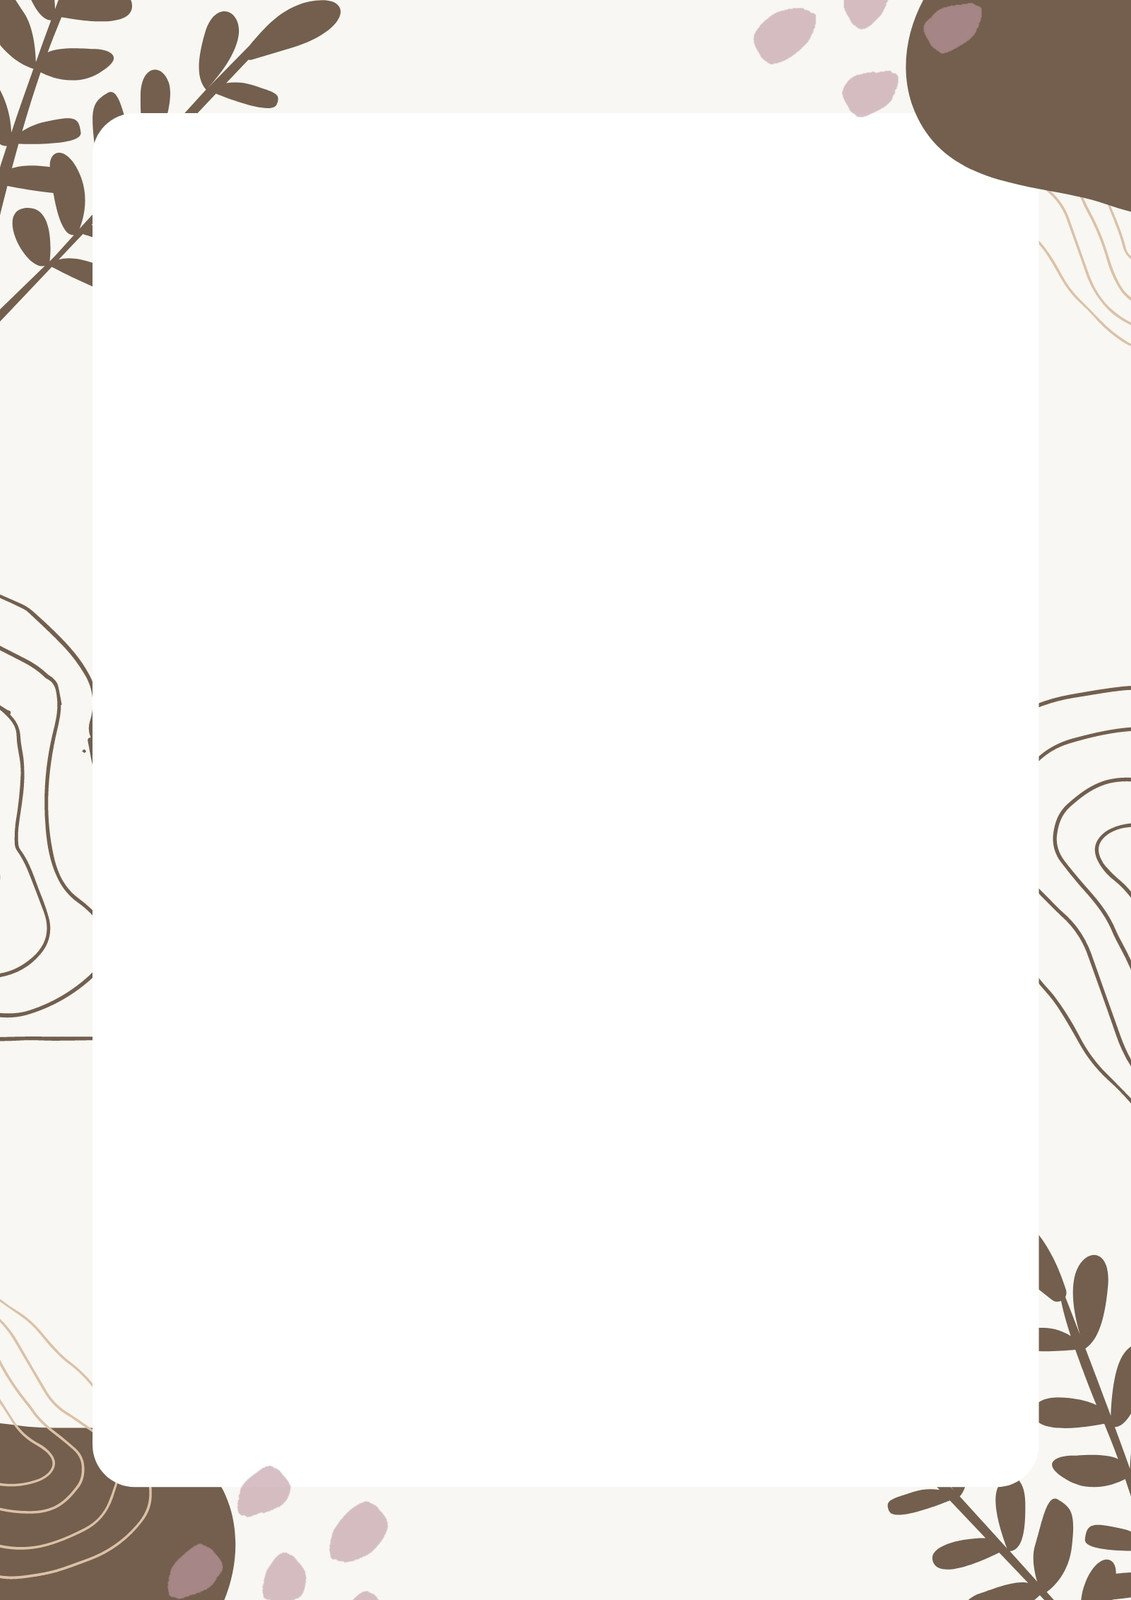 Free Printable Page Border Templates You Can Customize | Canva with regard to Free Printable Page Borders